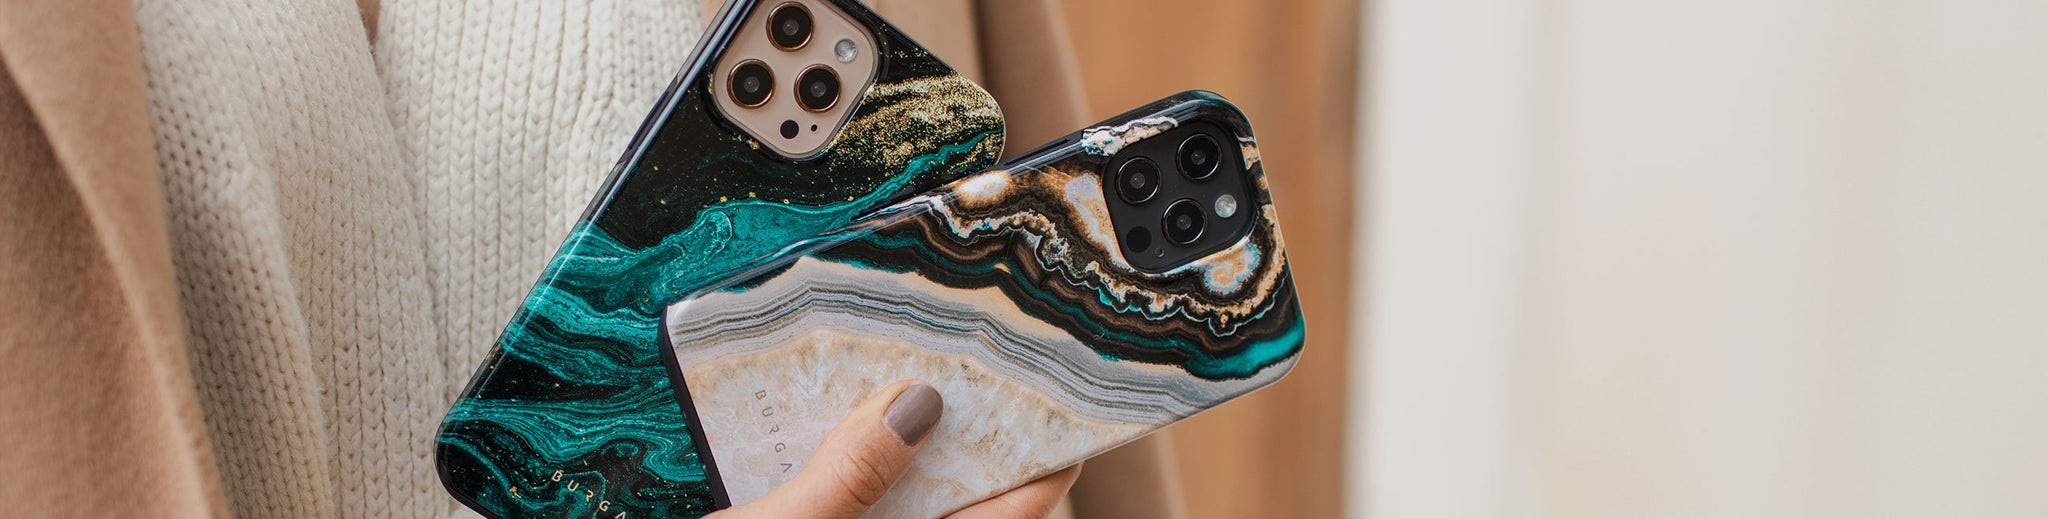 BURGA  Marble Phone Cases for iPhone and Samsung Galaxy